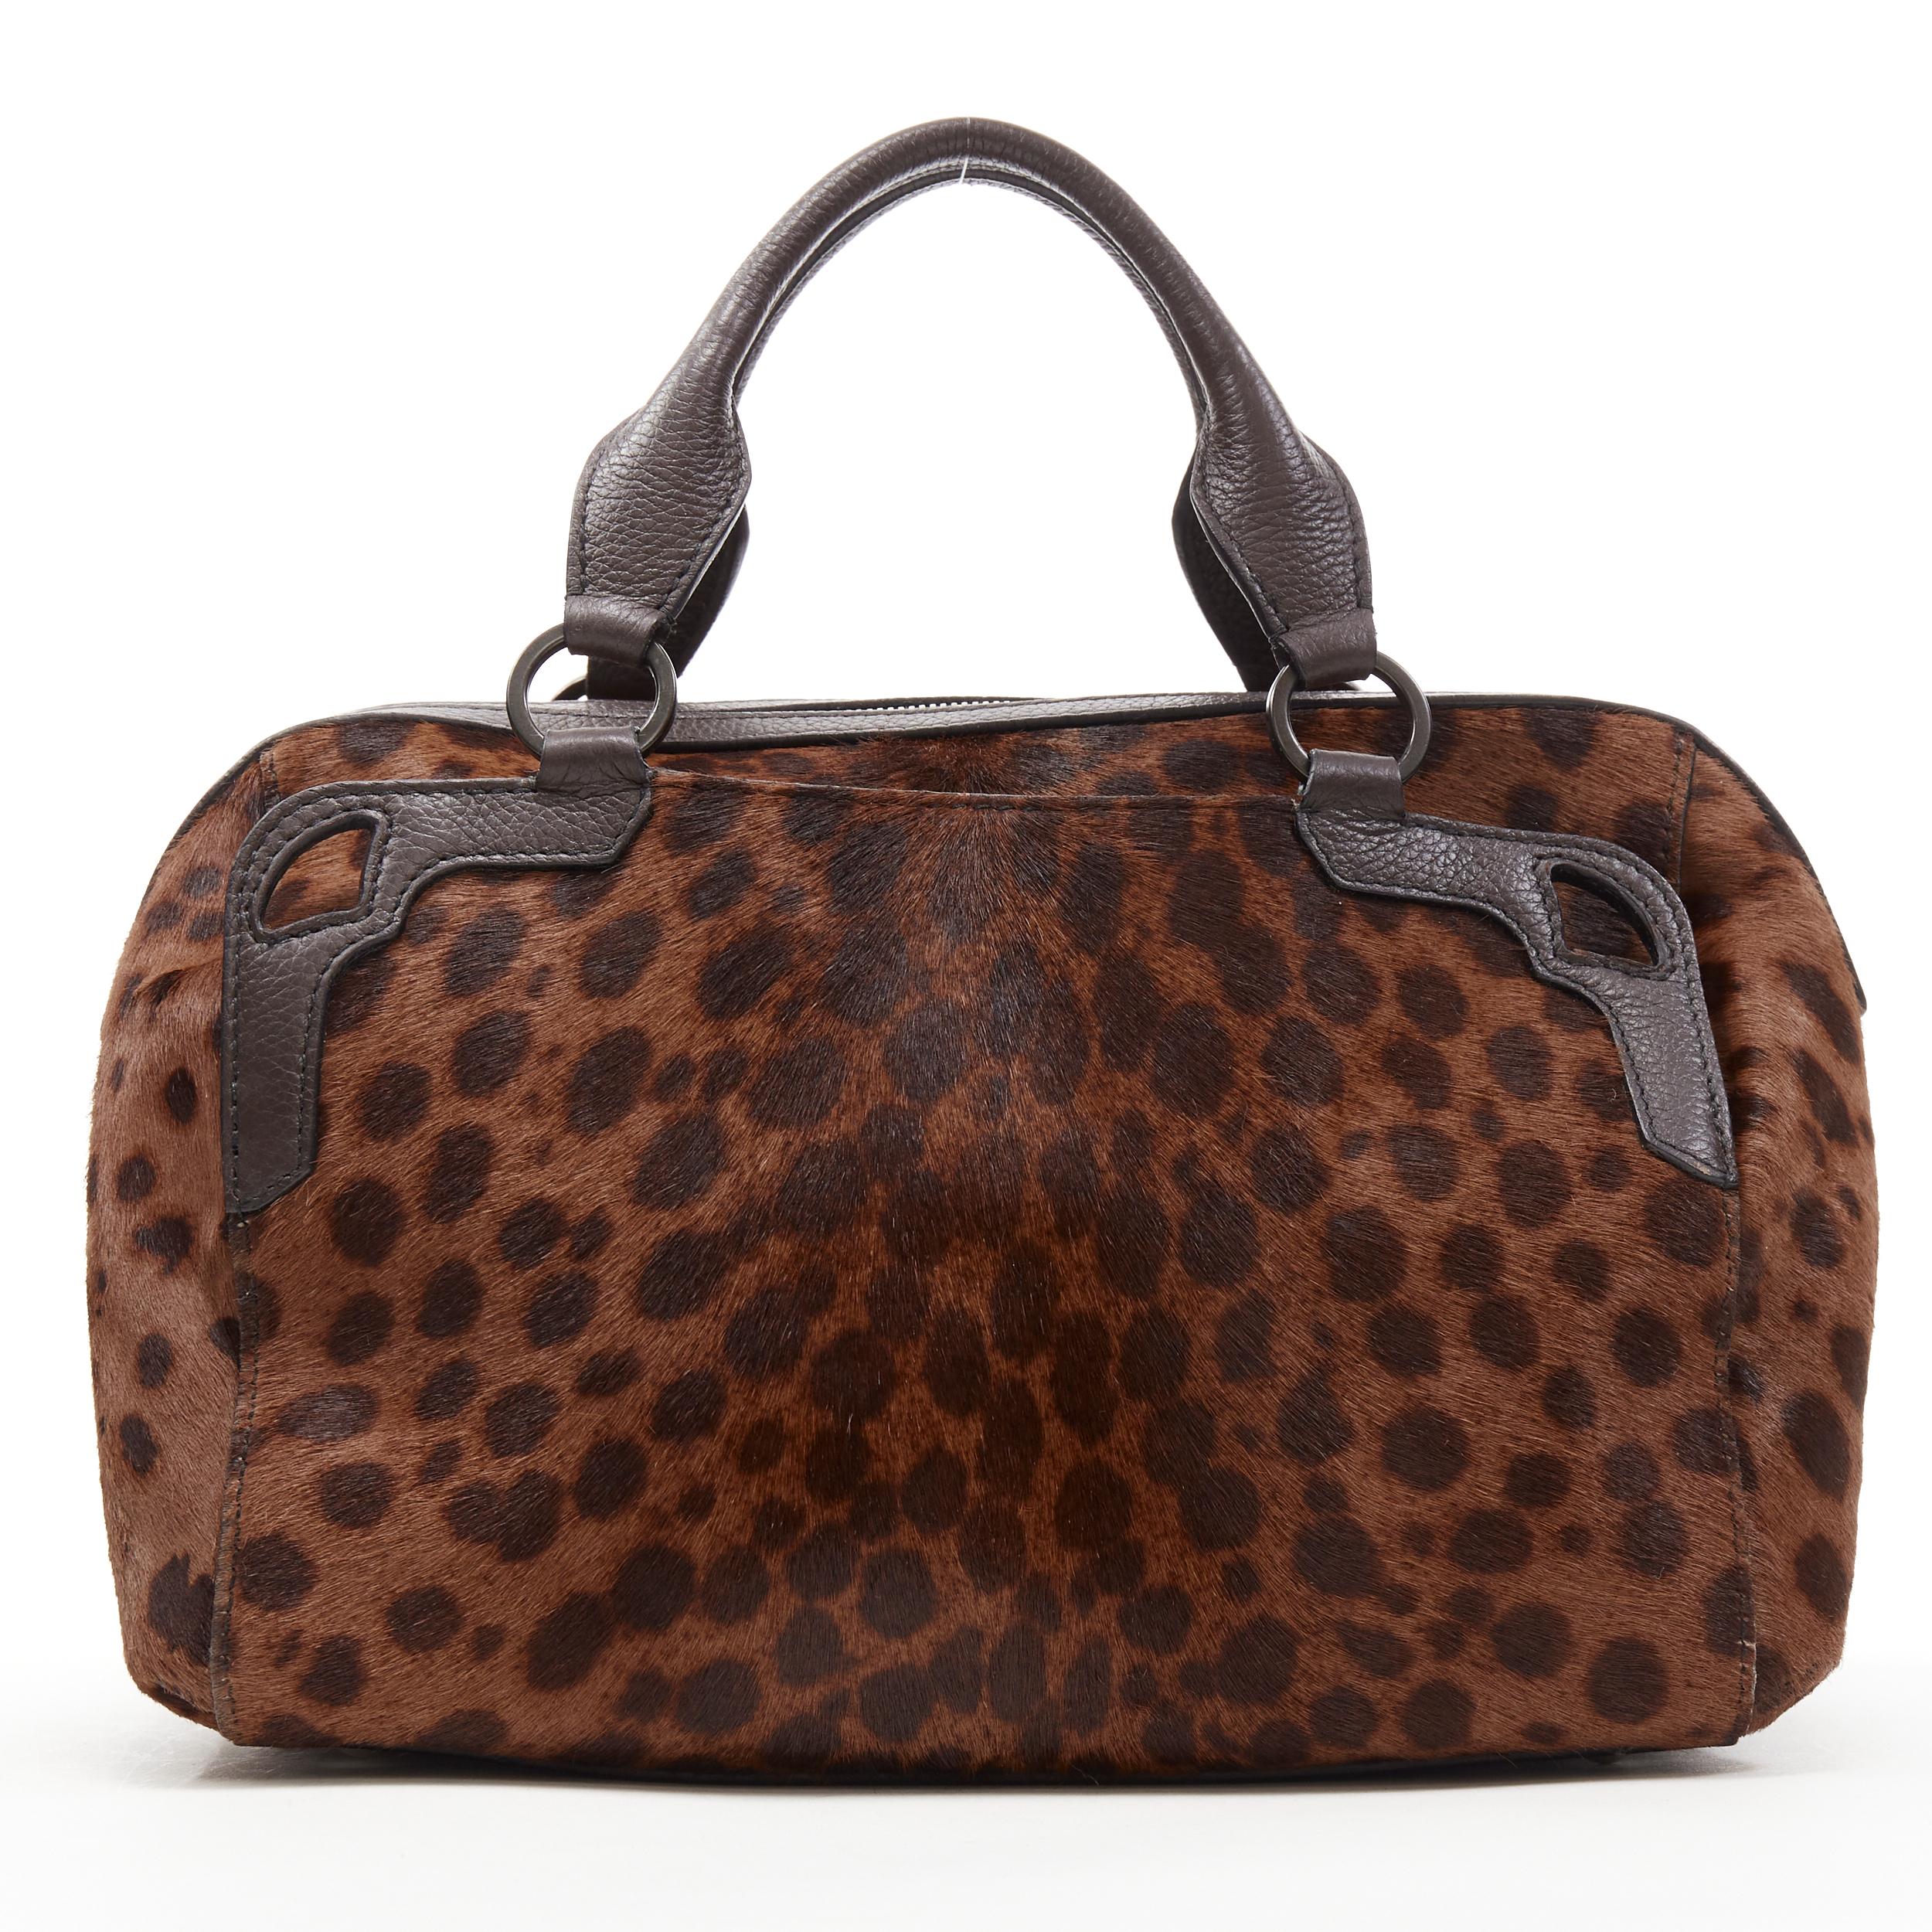 Women's CARTIER brown leopard print pony hair leather small top handle boston bag